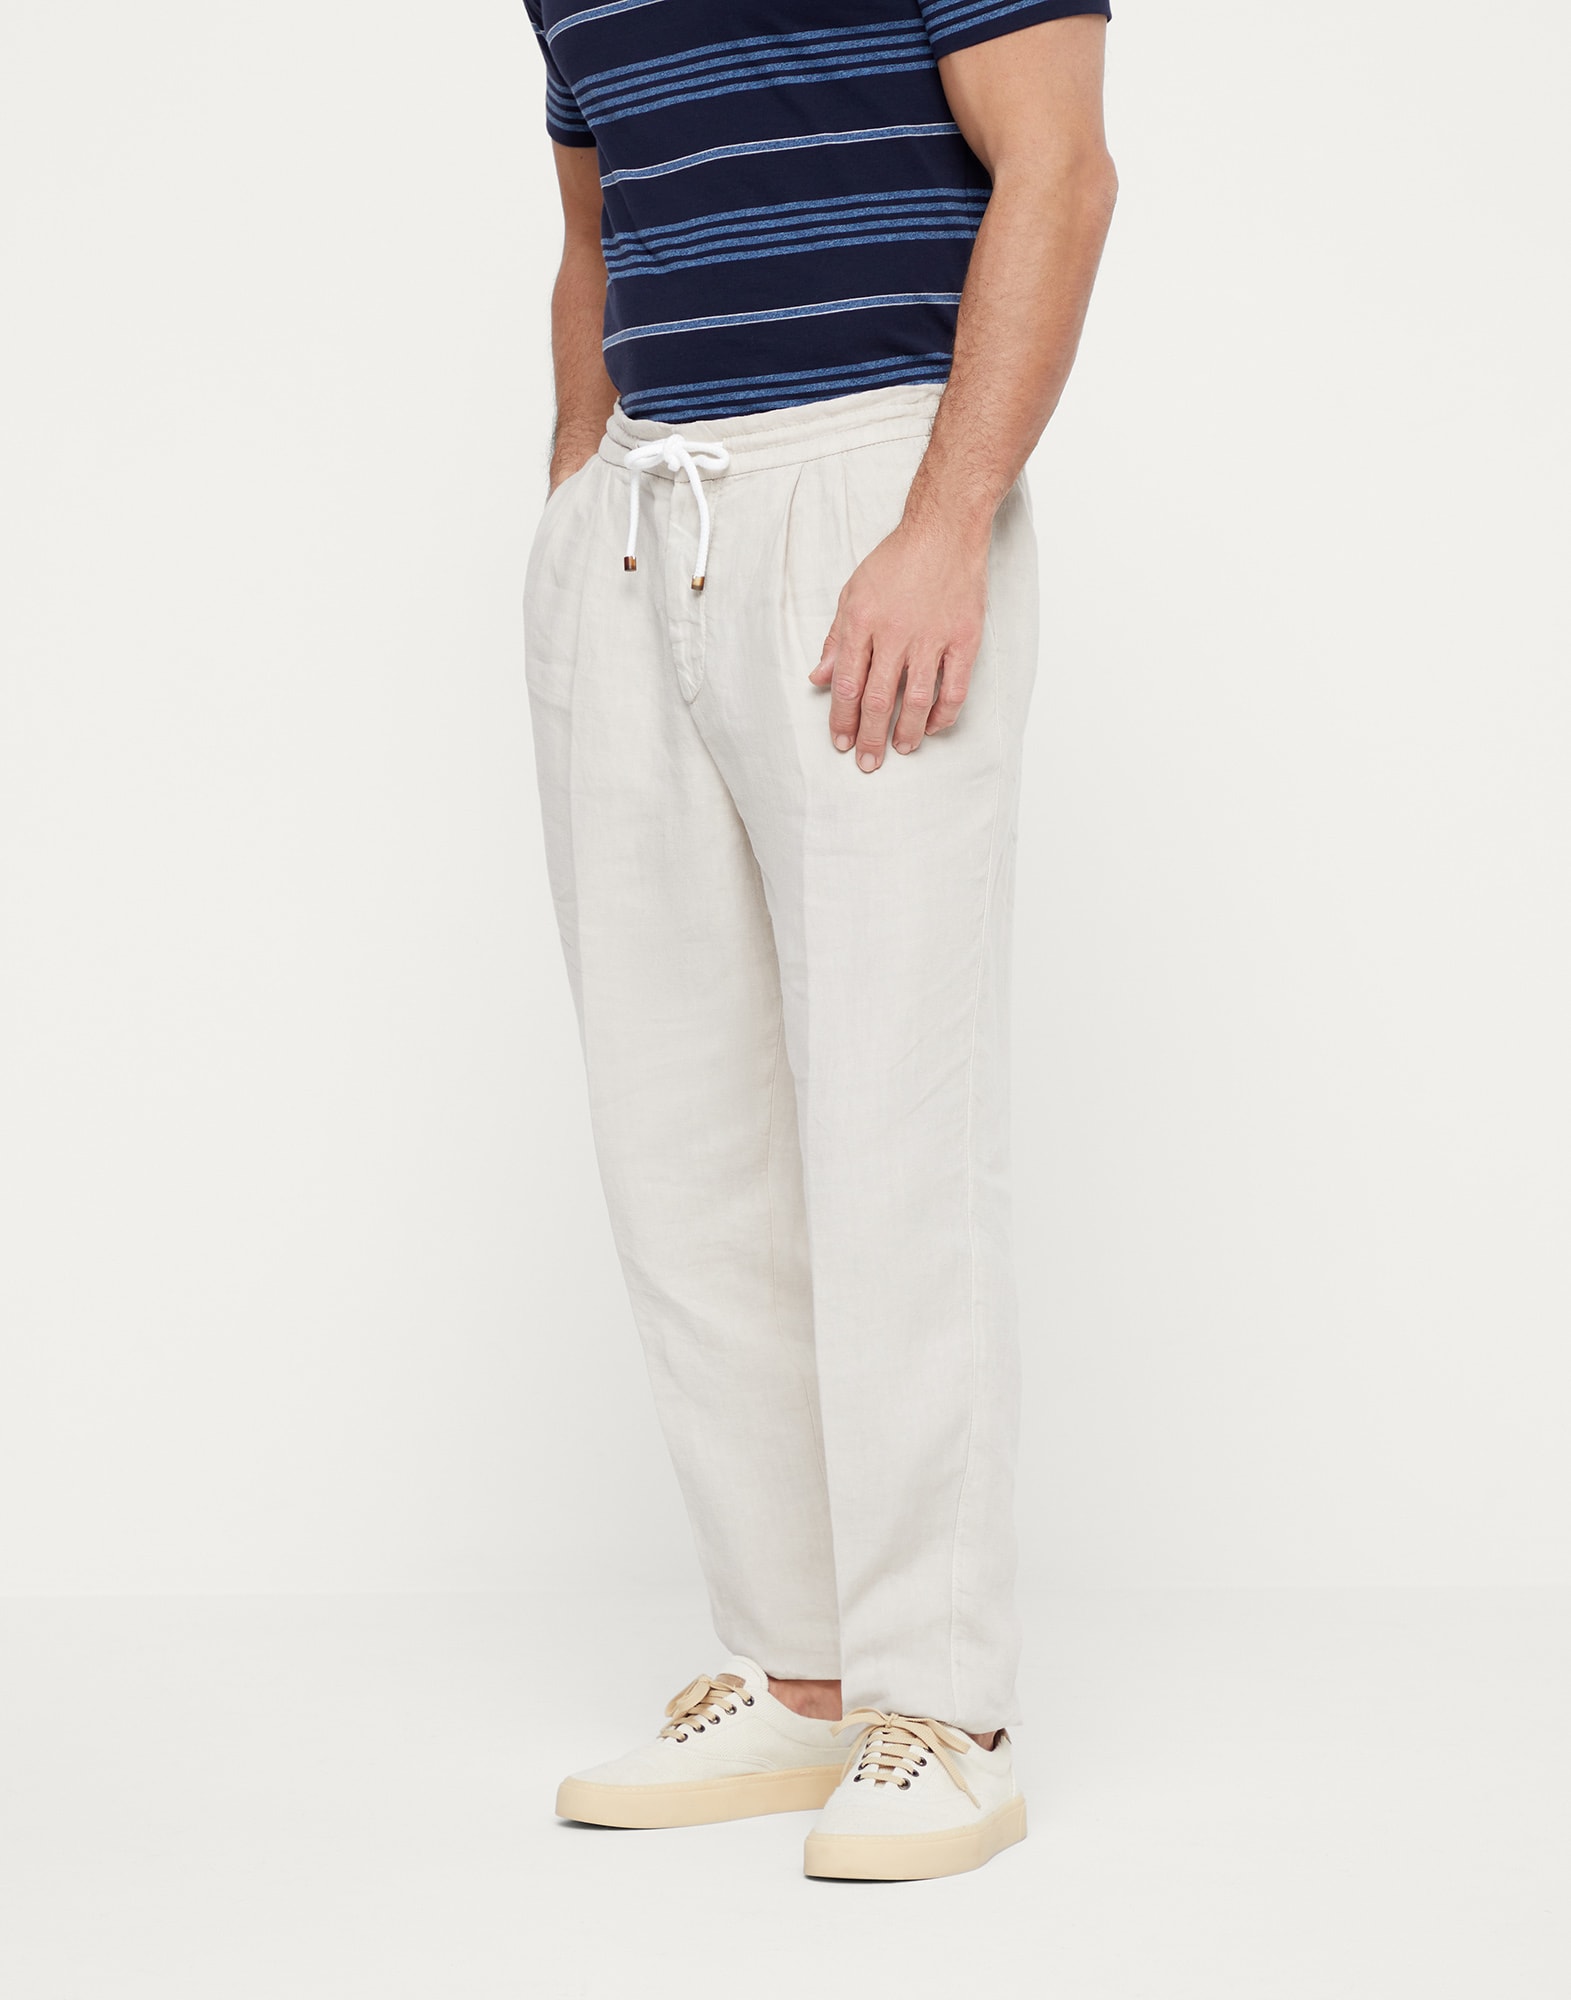 Leisure fit trousers with drawstring Oat Man -
                        Brunello Cucinelli
                    